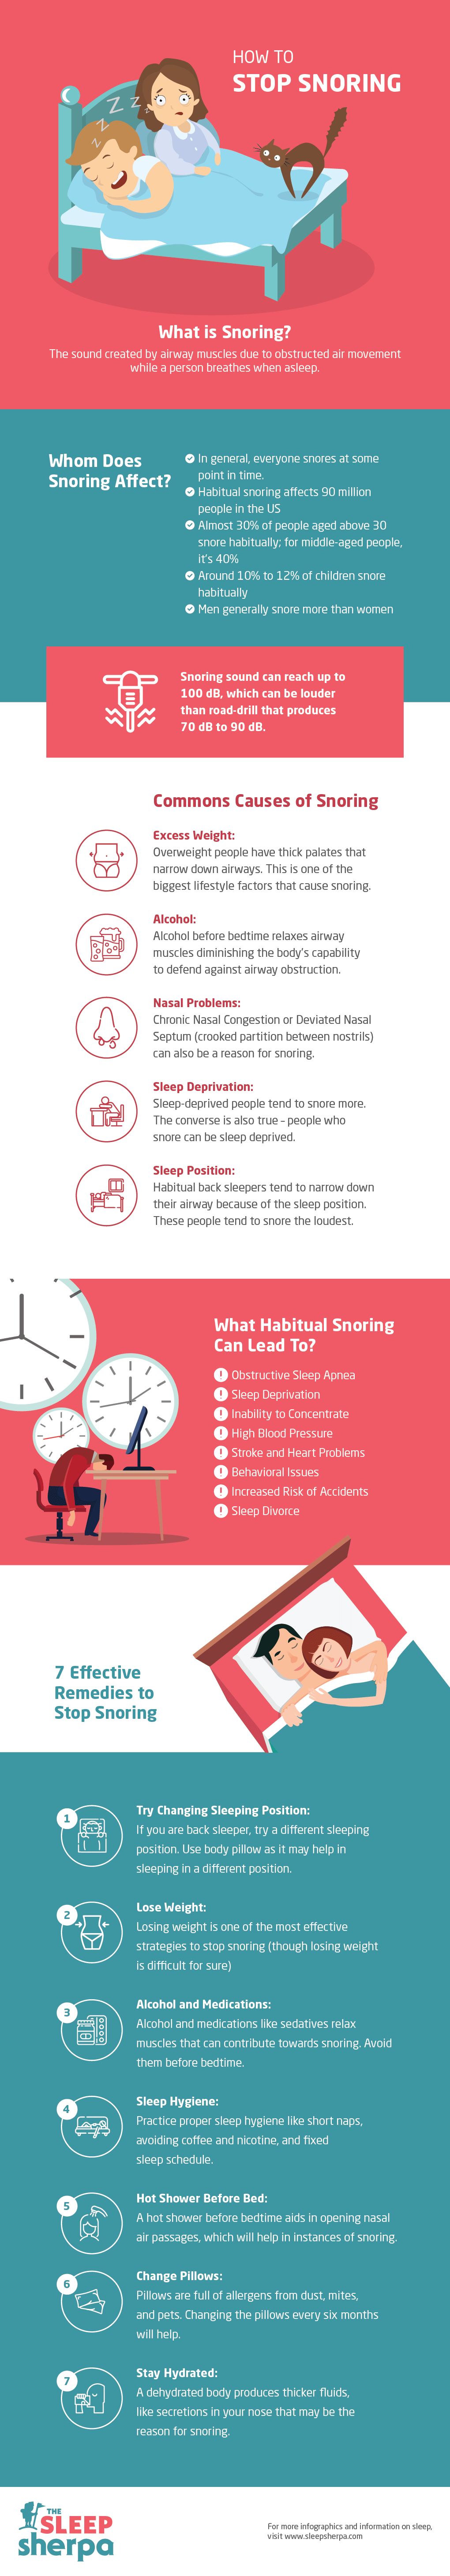 how to stop snoring infographic